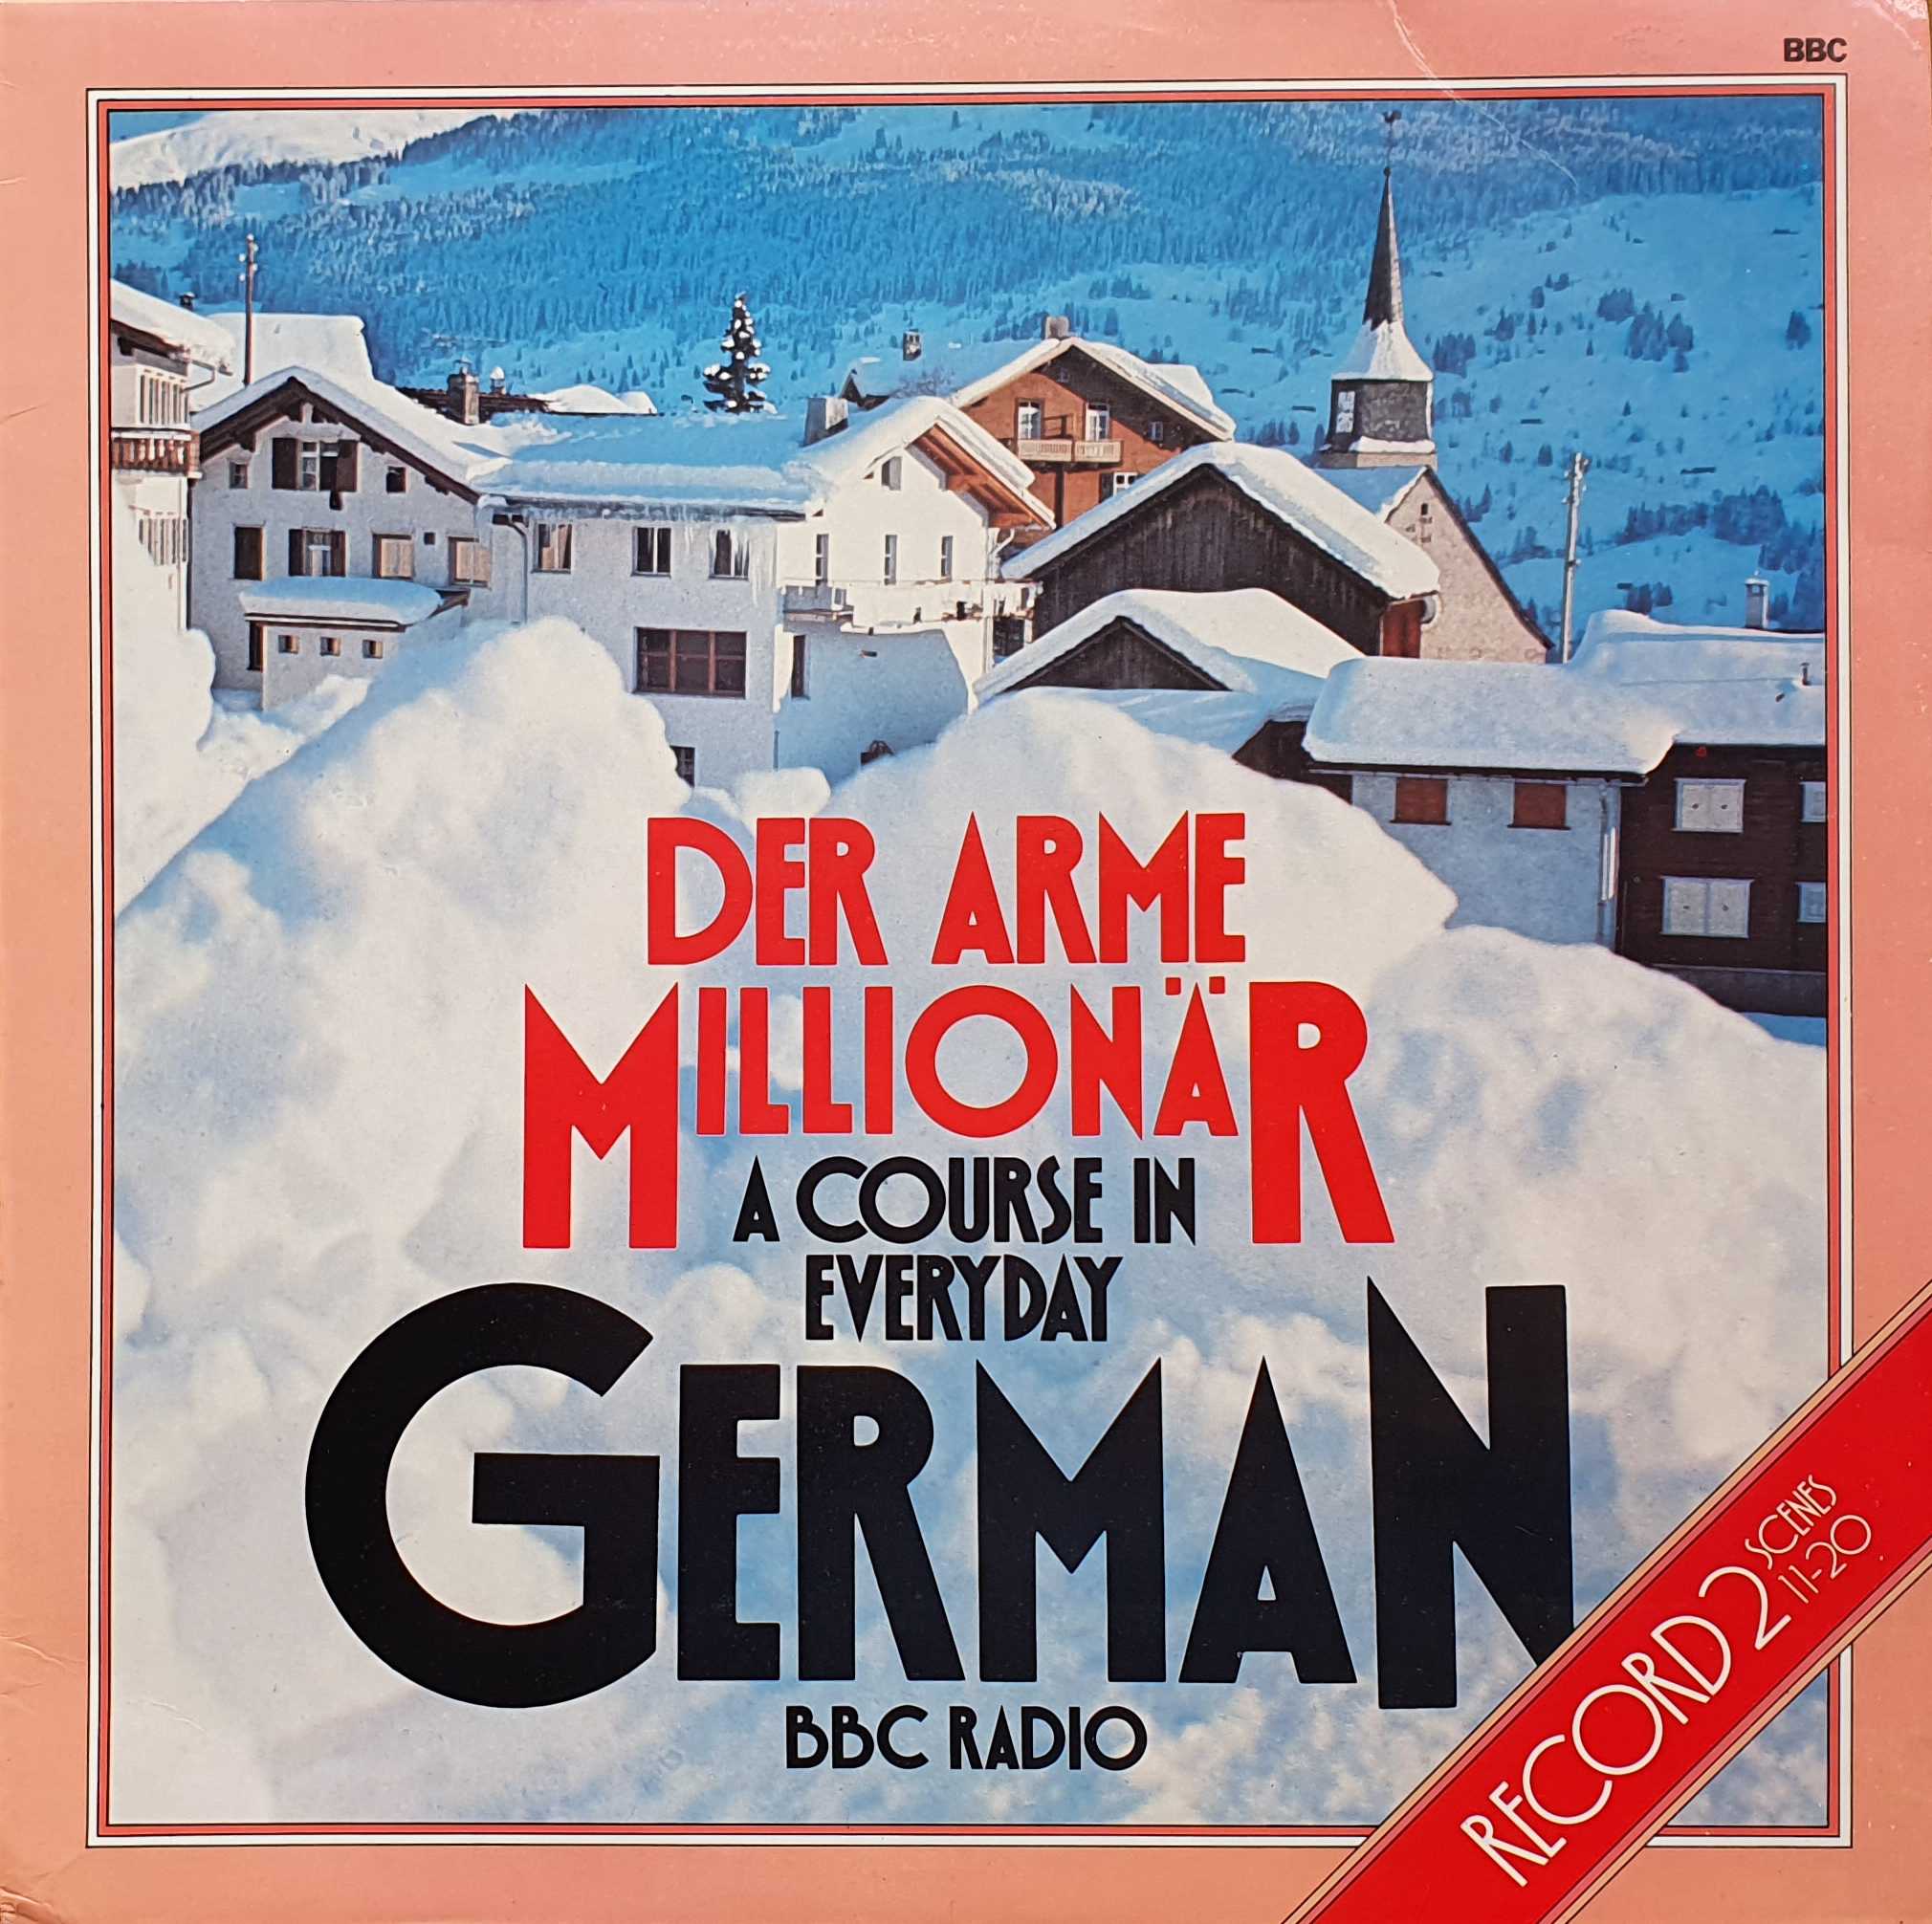 Picture of OP 115/116 Der Arme Million'a'r - A course in everyday German - Record 2 - Scenes 11 - 20 by artist Erich Kastner from the BBC albums - Records and Tapes library